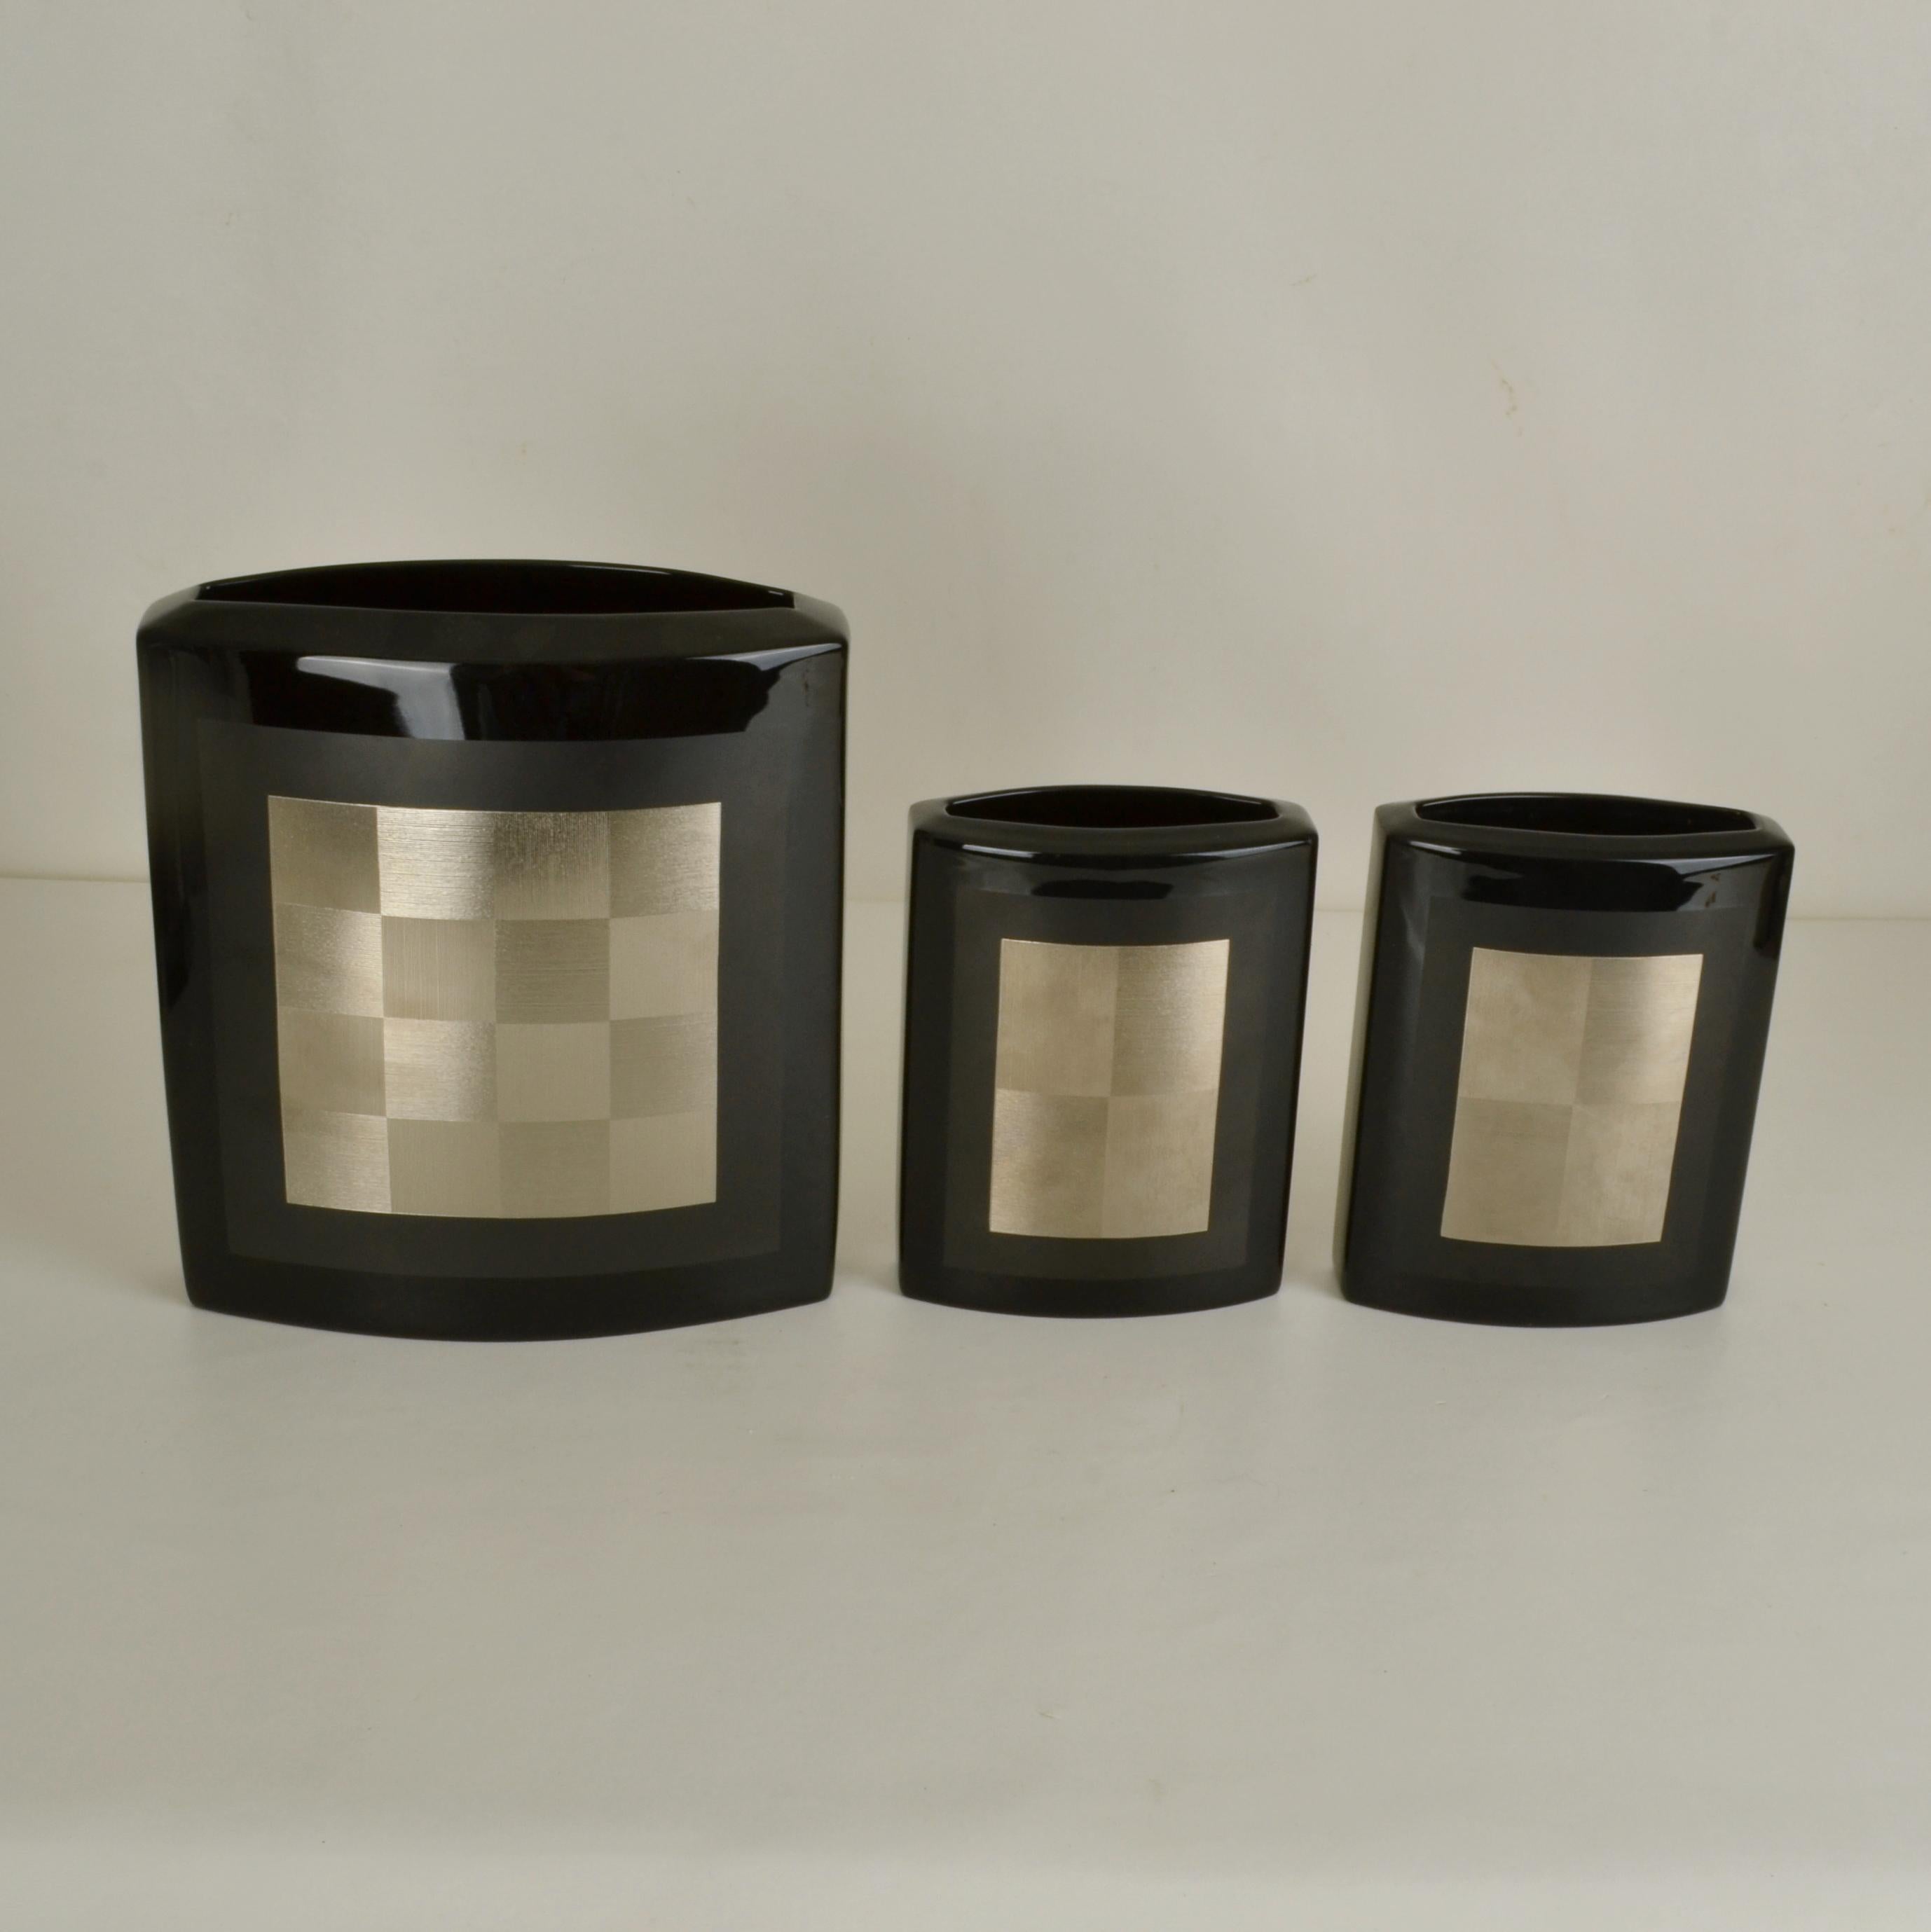 Set of five black Rosenthal porcelain vases marked Studio-line designed. Four are by Helmut Dresler (1927-2016), hand painted three in sliver geometric chequer design and one a V motif. One is by Elisa Fisher-Treyden (1901-1995). They all have a